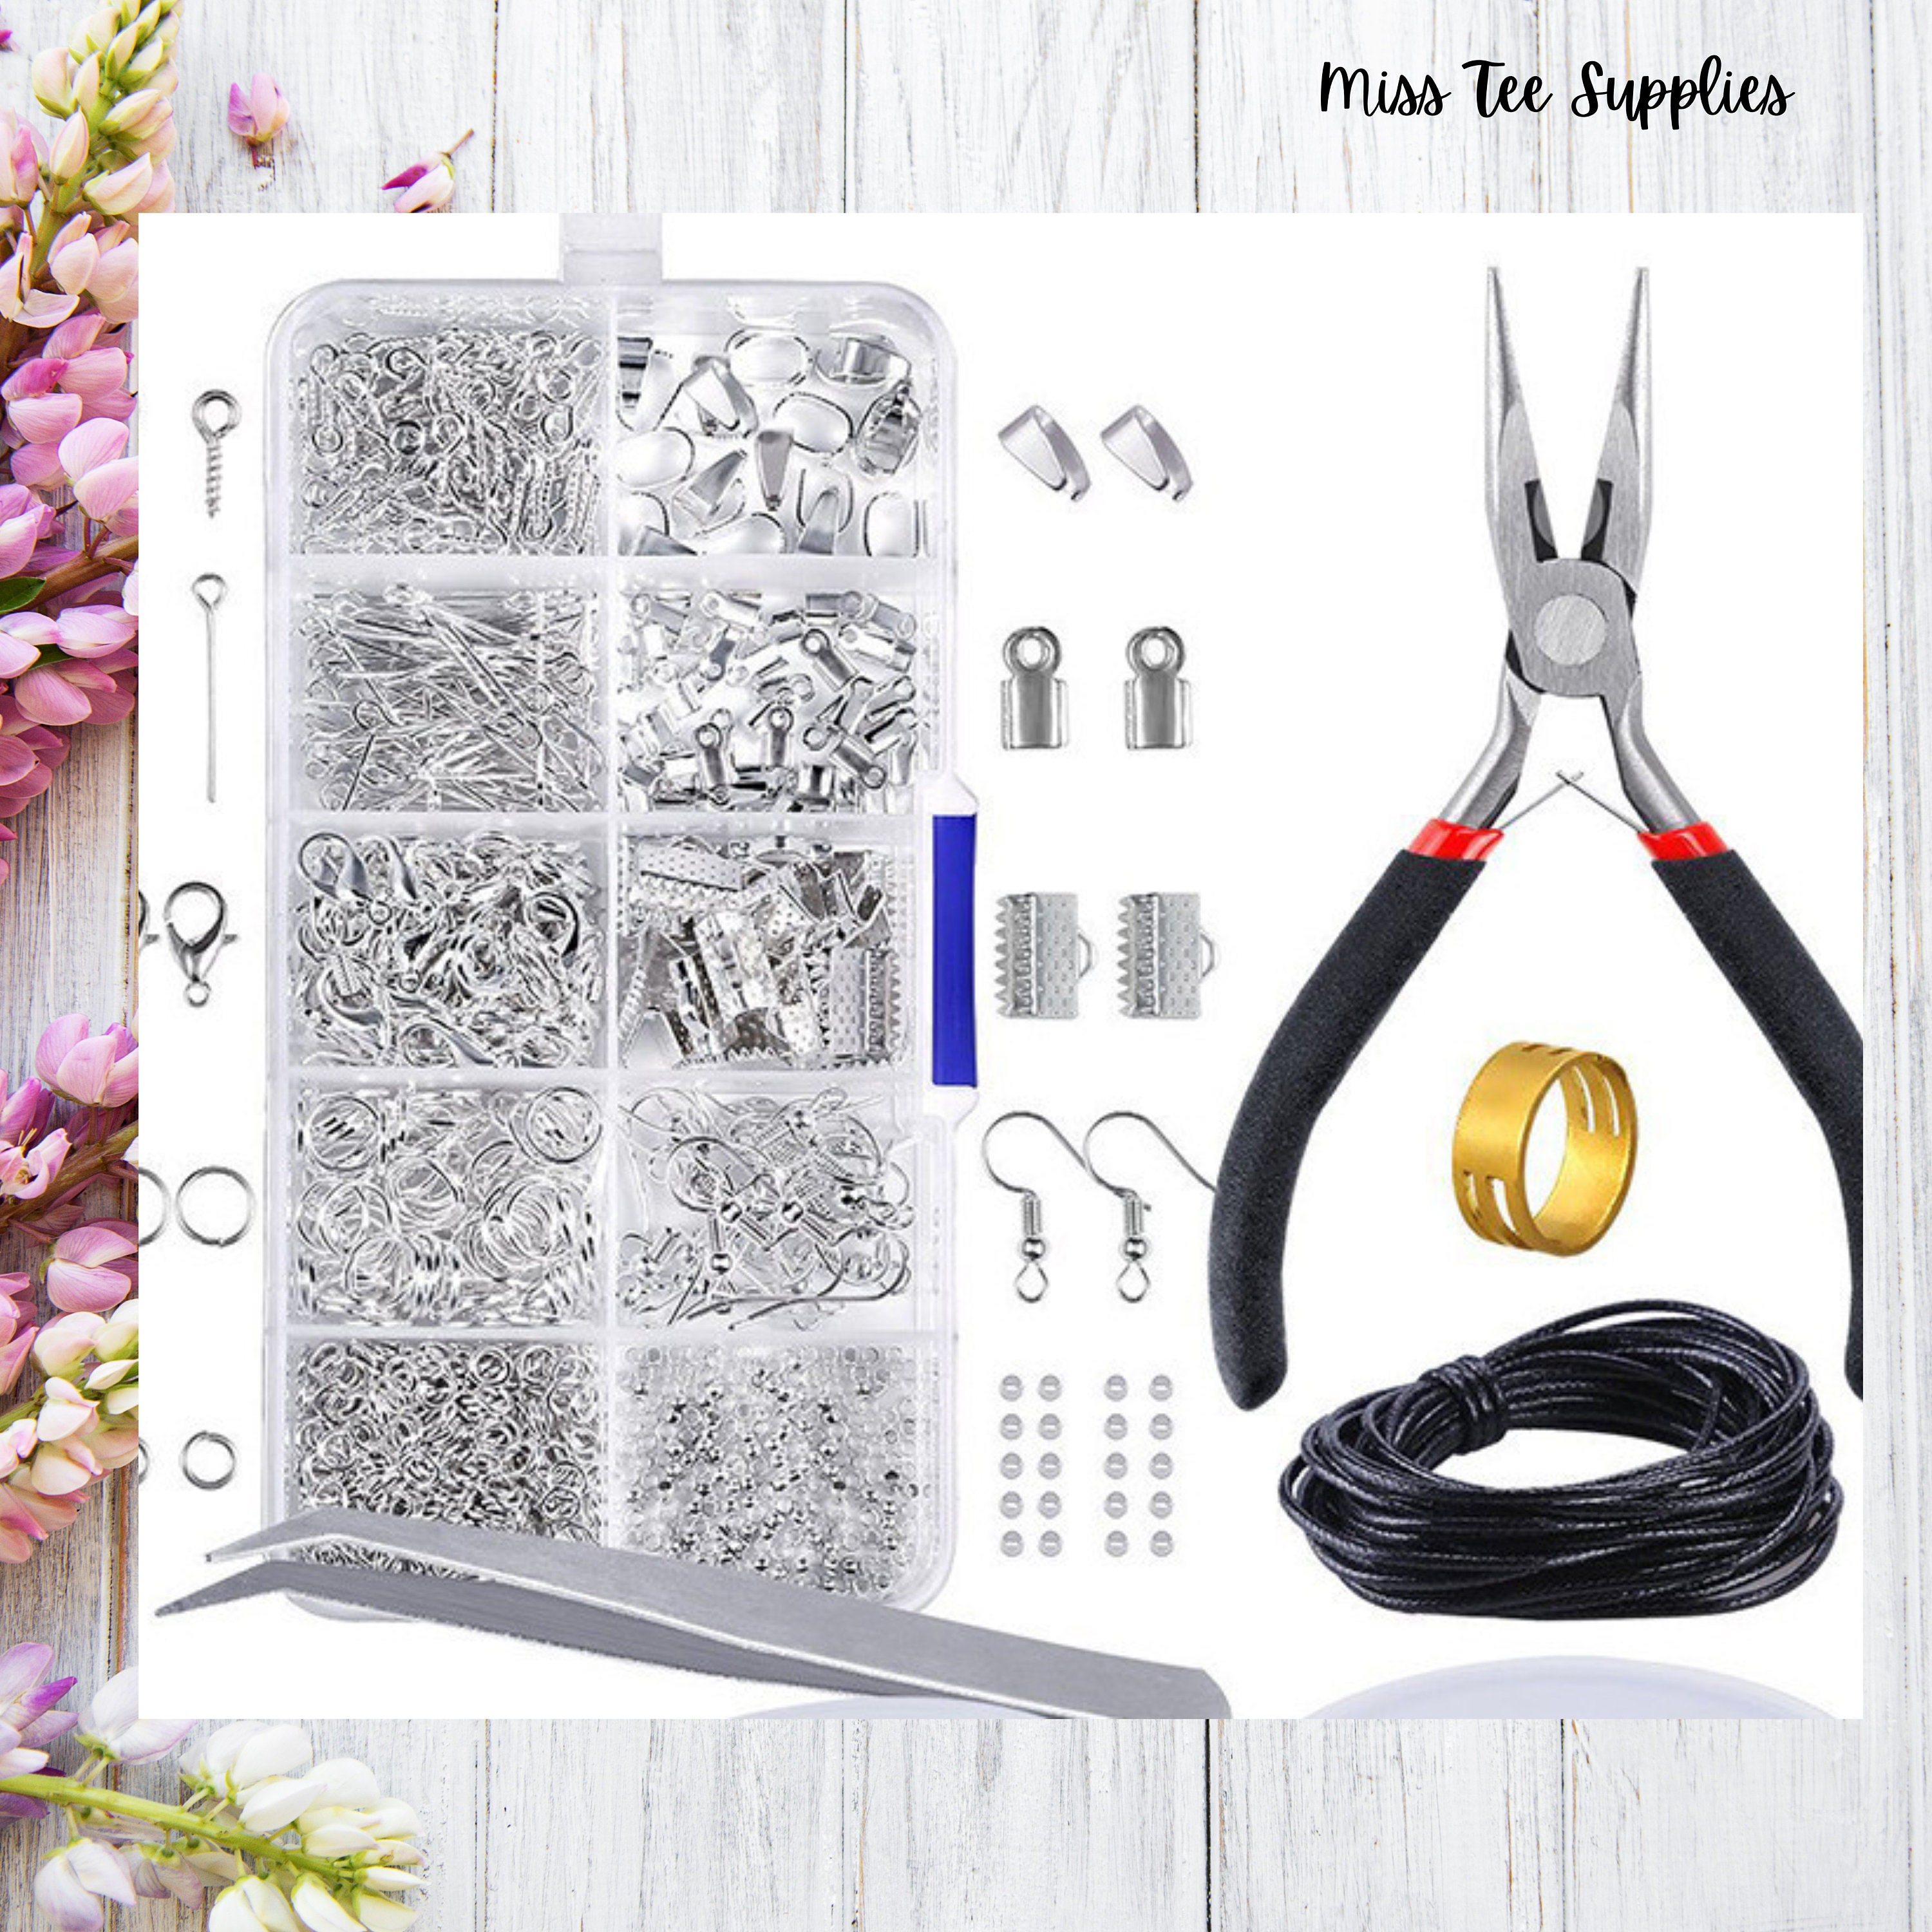 New Jewelry Repair Kit W/gold Filled Assorted Jump Rings W/ Plier